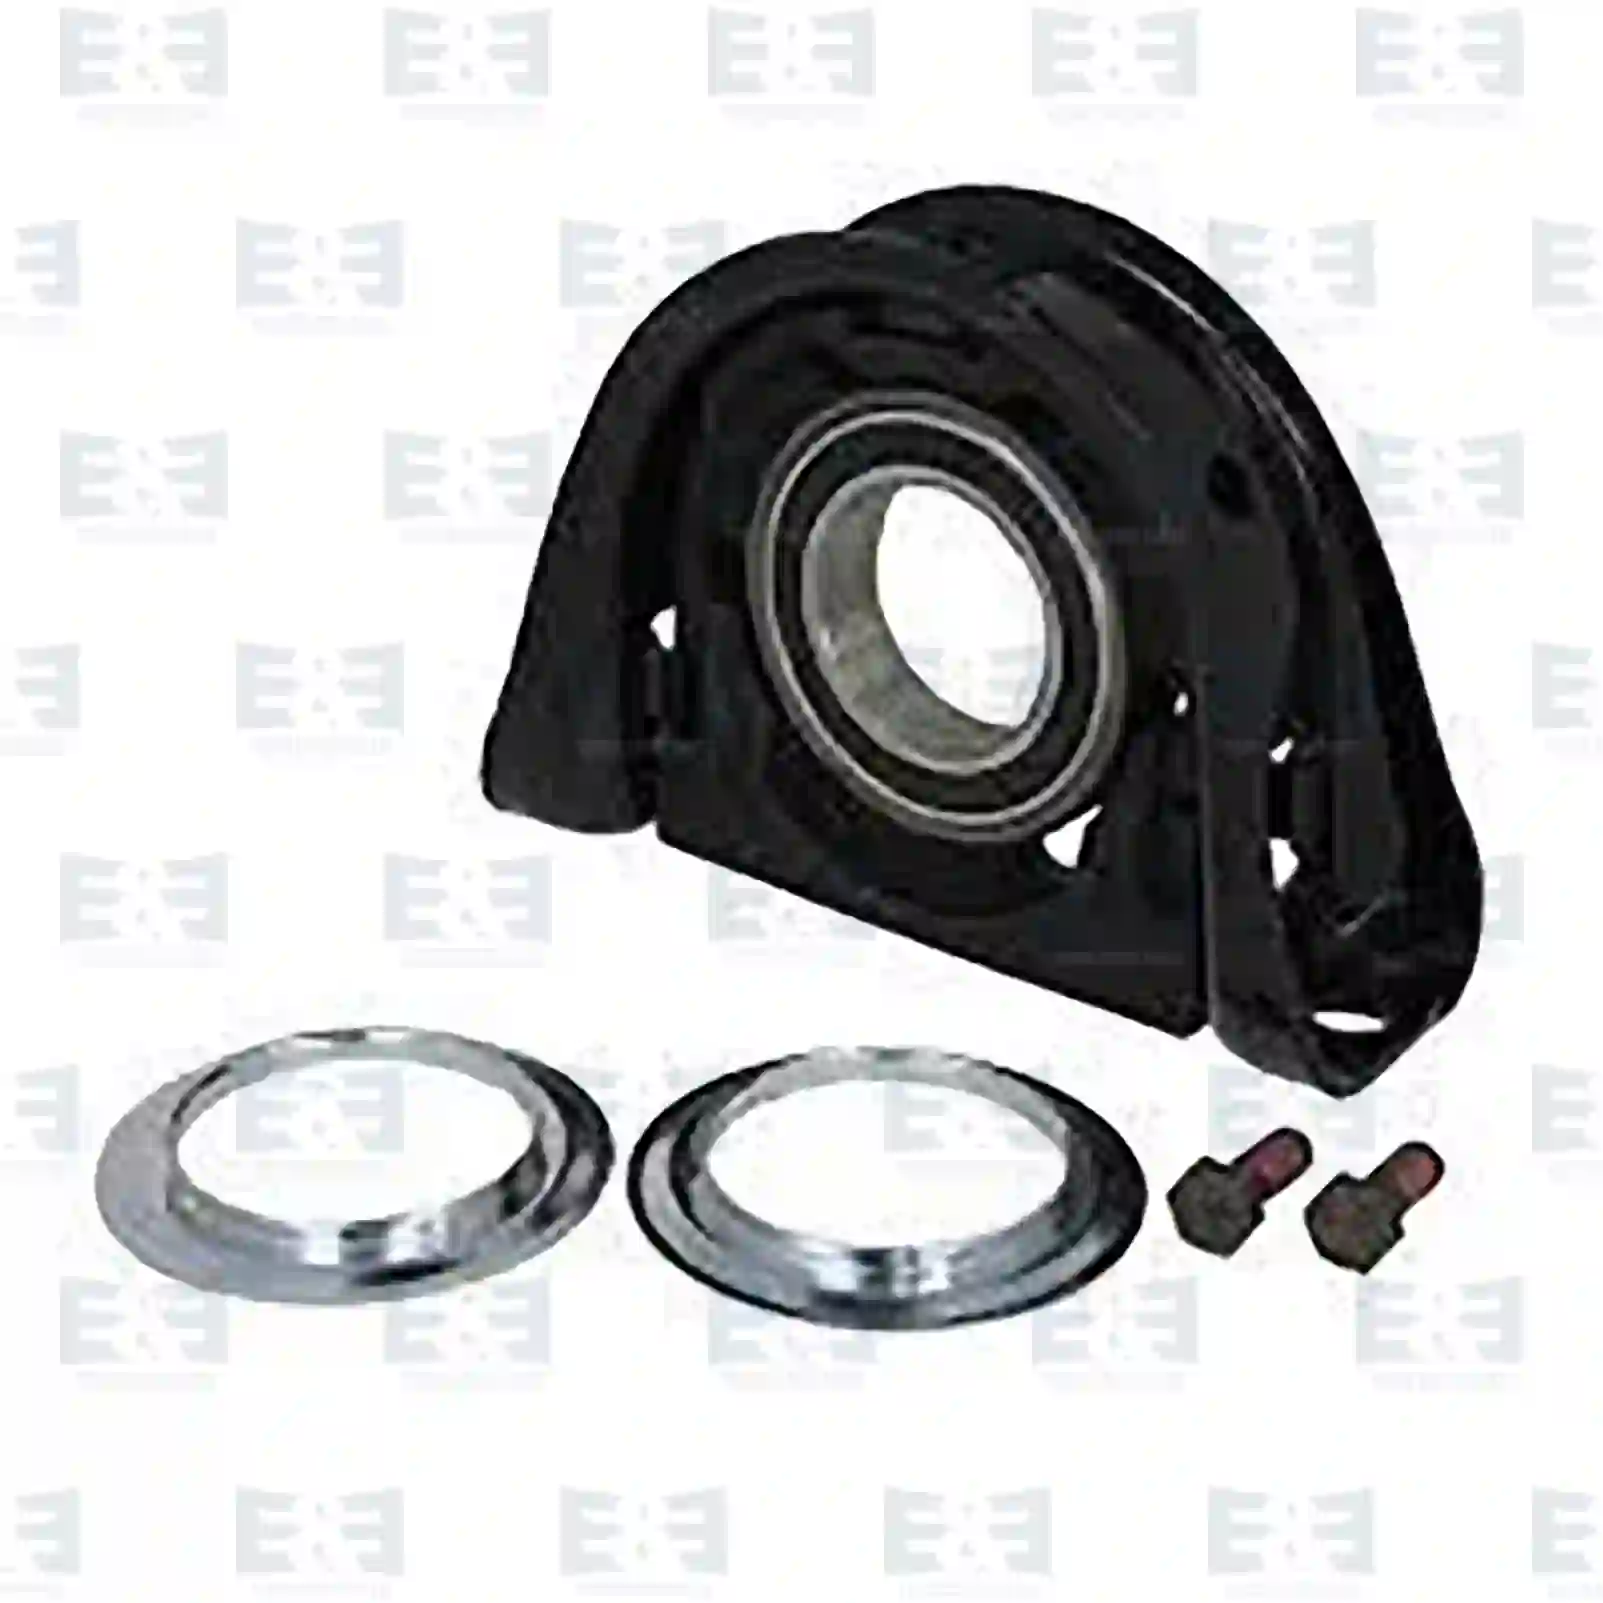 Support Bearing Center bearing, EE No 2E2276870 ,  oem no:21081150, 22611720, 25641426 E&E Truck Spare Parts | Truck Spare Parts, Auotomotive Spare Parts